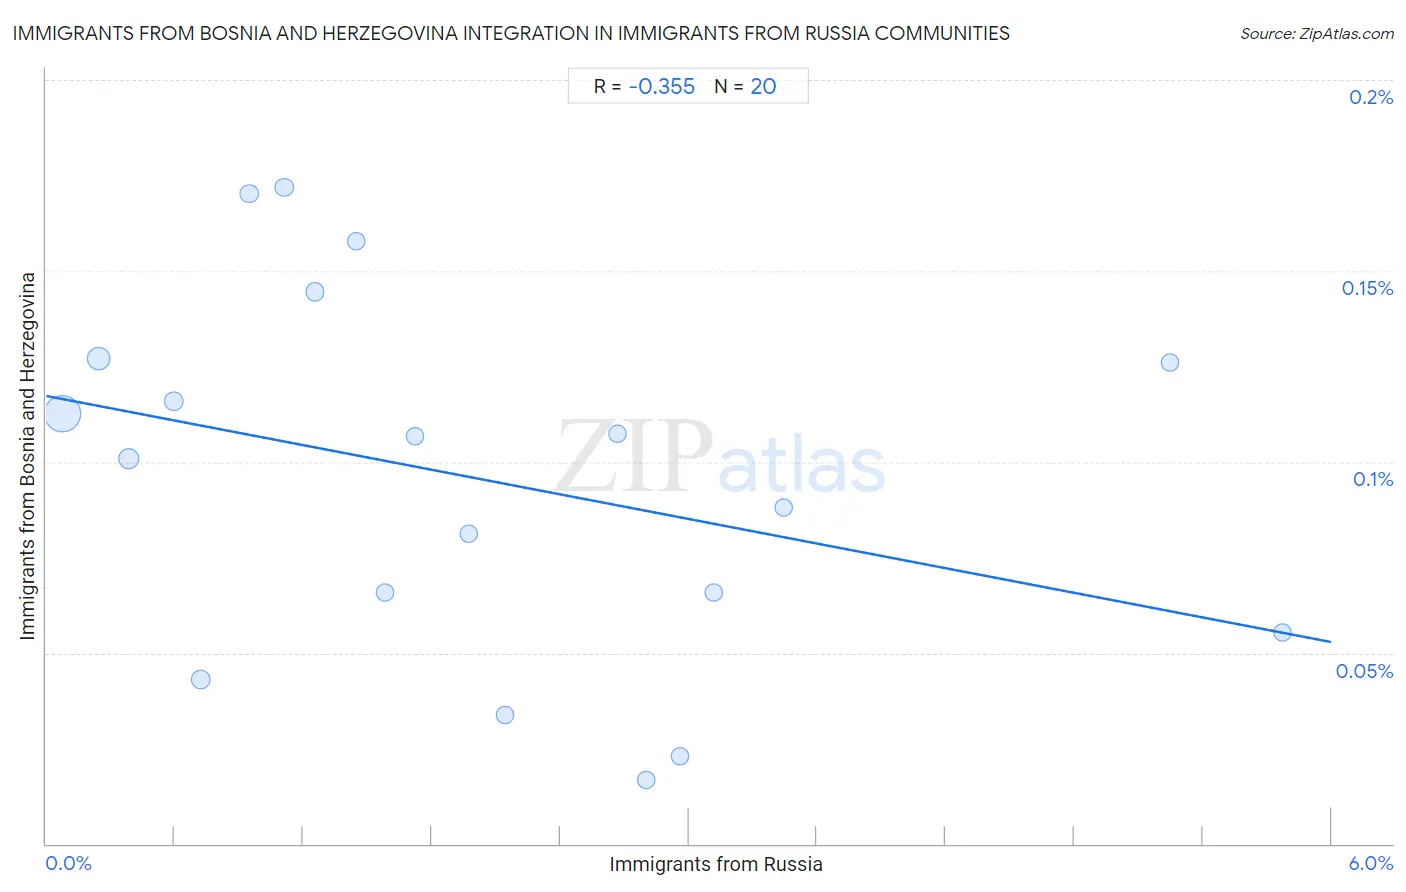 Immigrants from Russia Integration in Immigrants from Bosnia and Herzegovina Communities